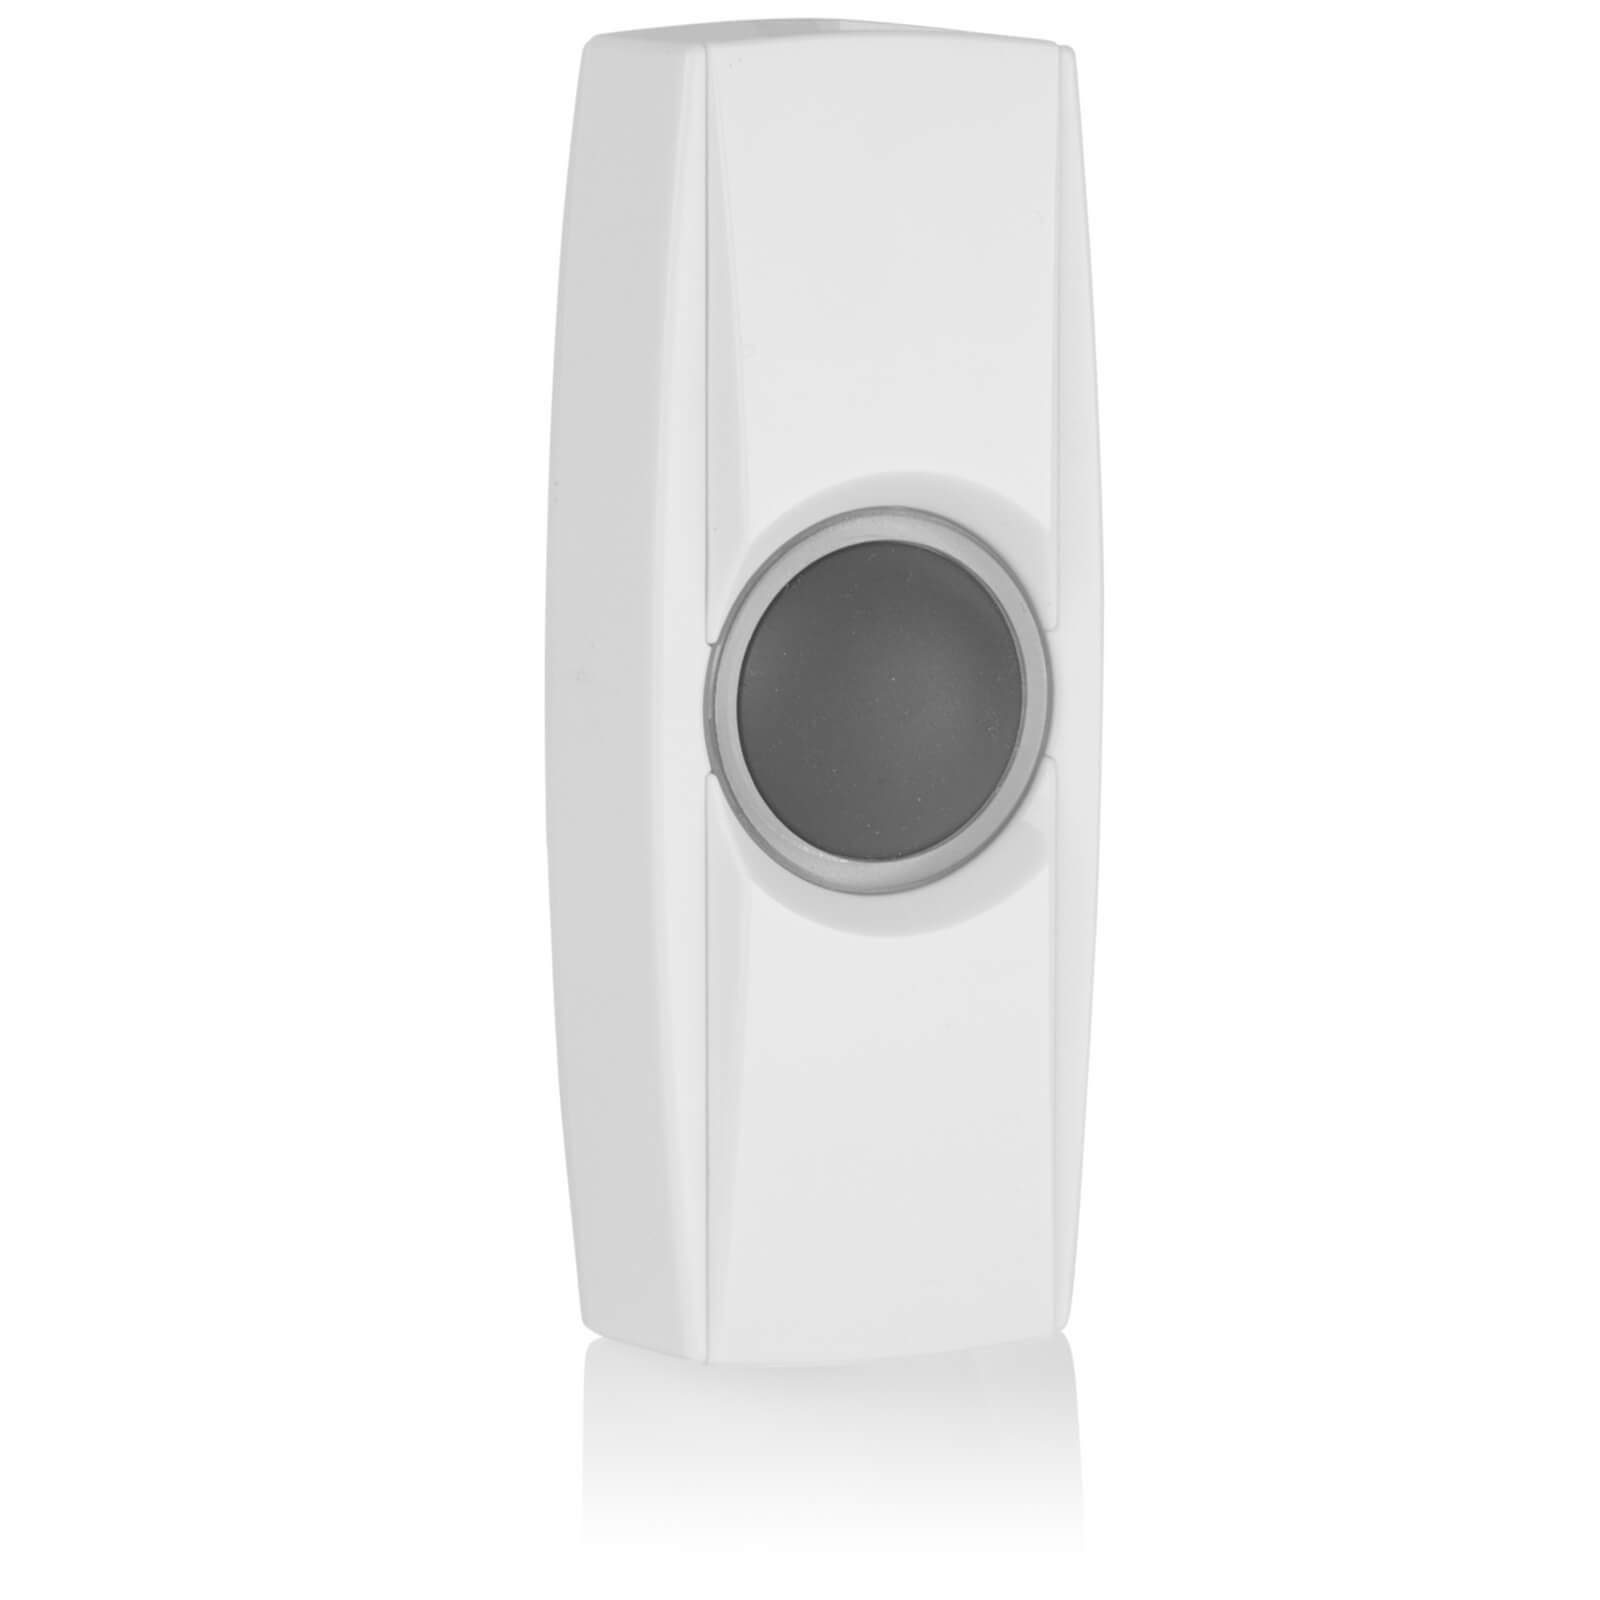 Byron BY34 Wireless Extra Push - White